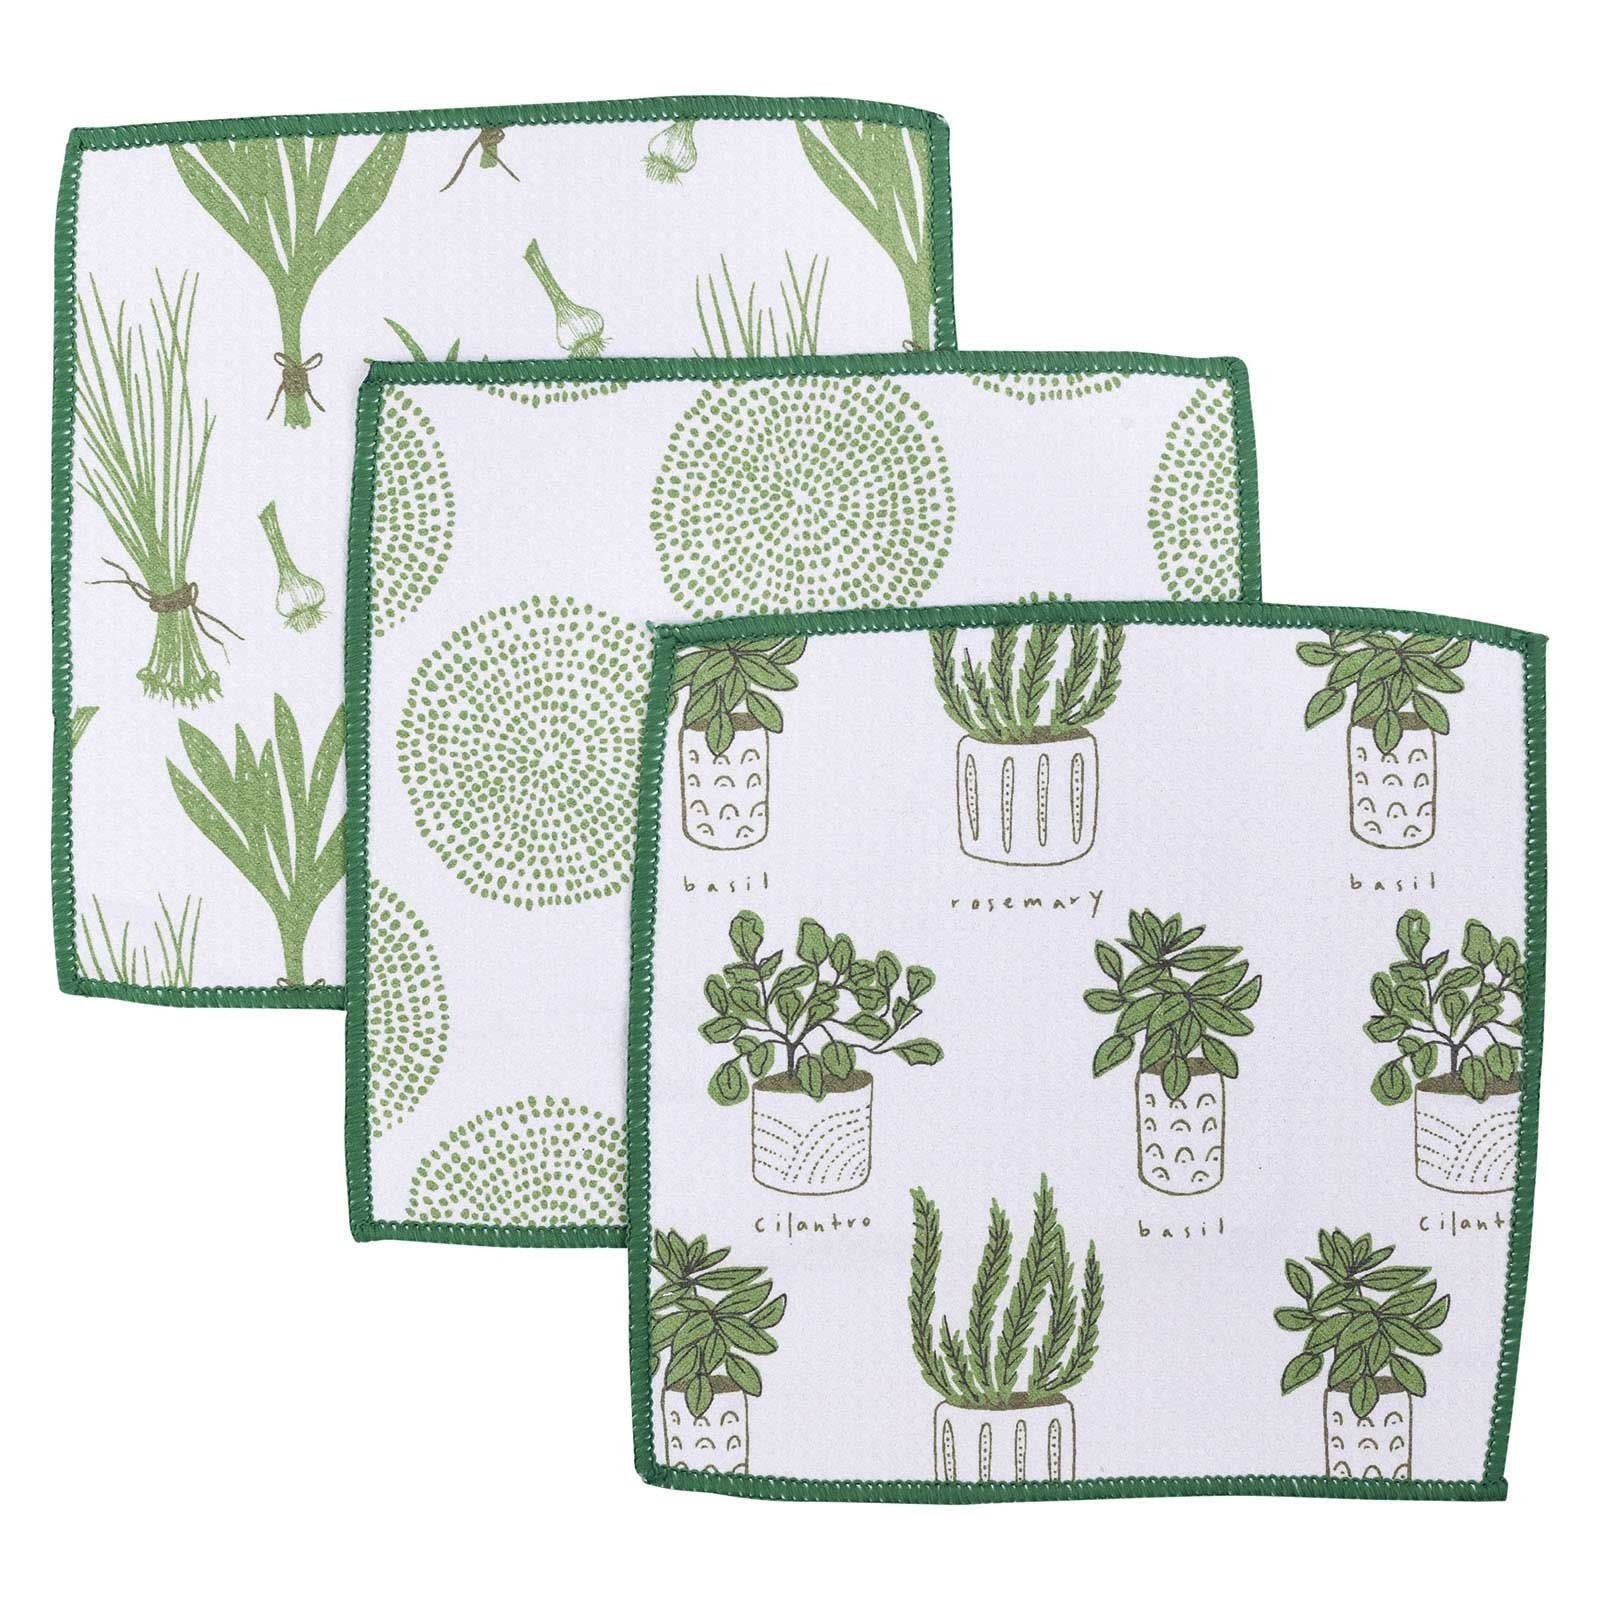 Dish Cloths | Set of 3 | 100% Biodegradable - Healthybaby